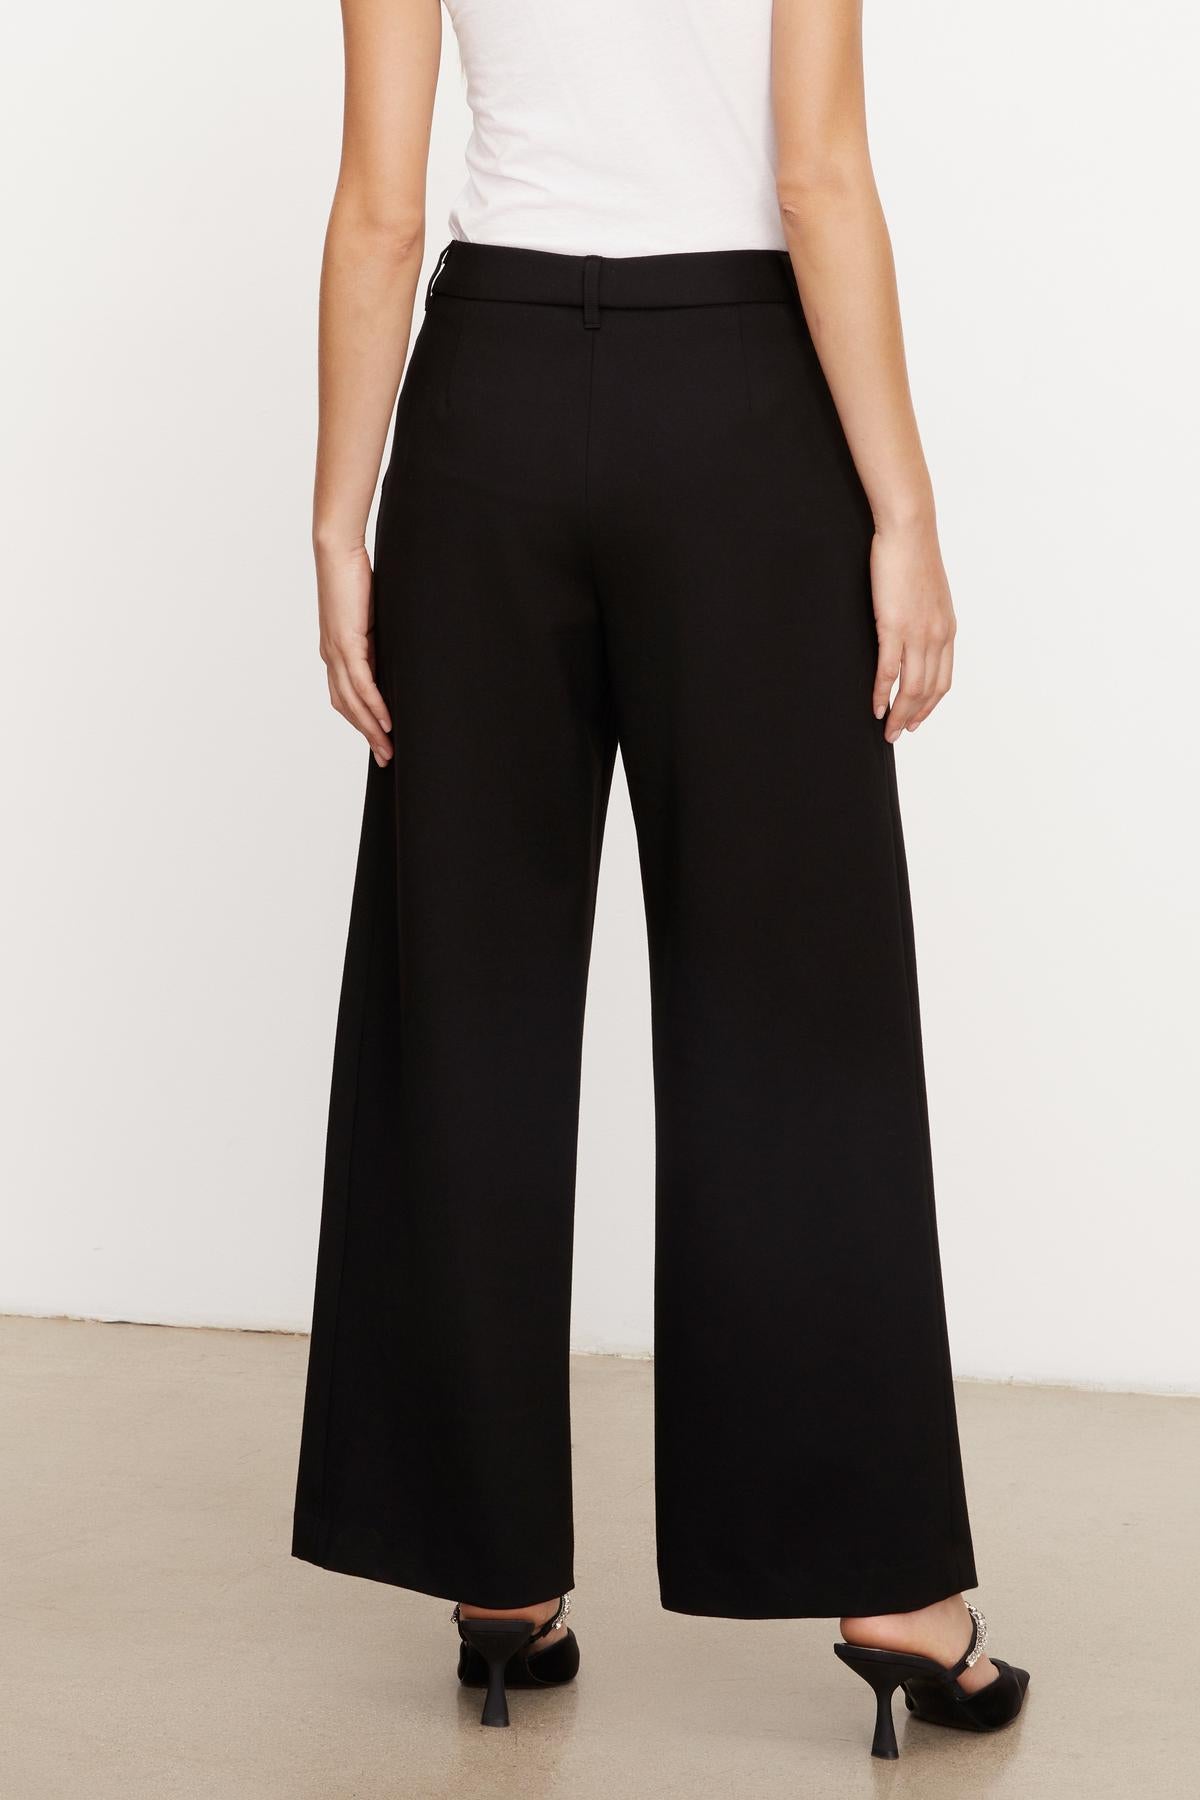 The back view of a person wearing Velvet by Graham & Spencer's LEONA WIDE LEG PONTI PANT.-35696188653761